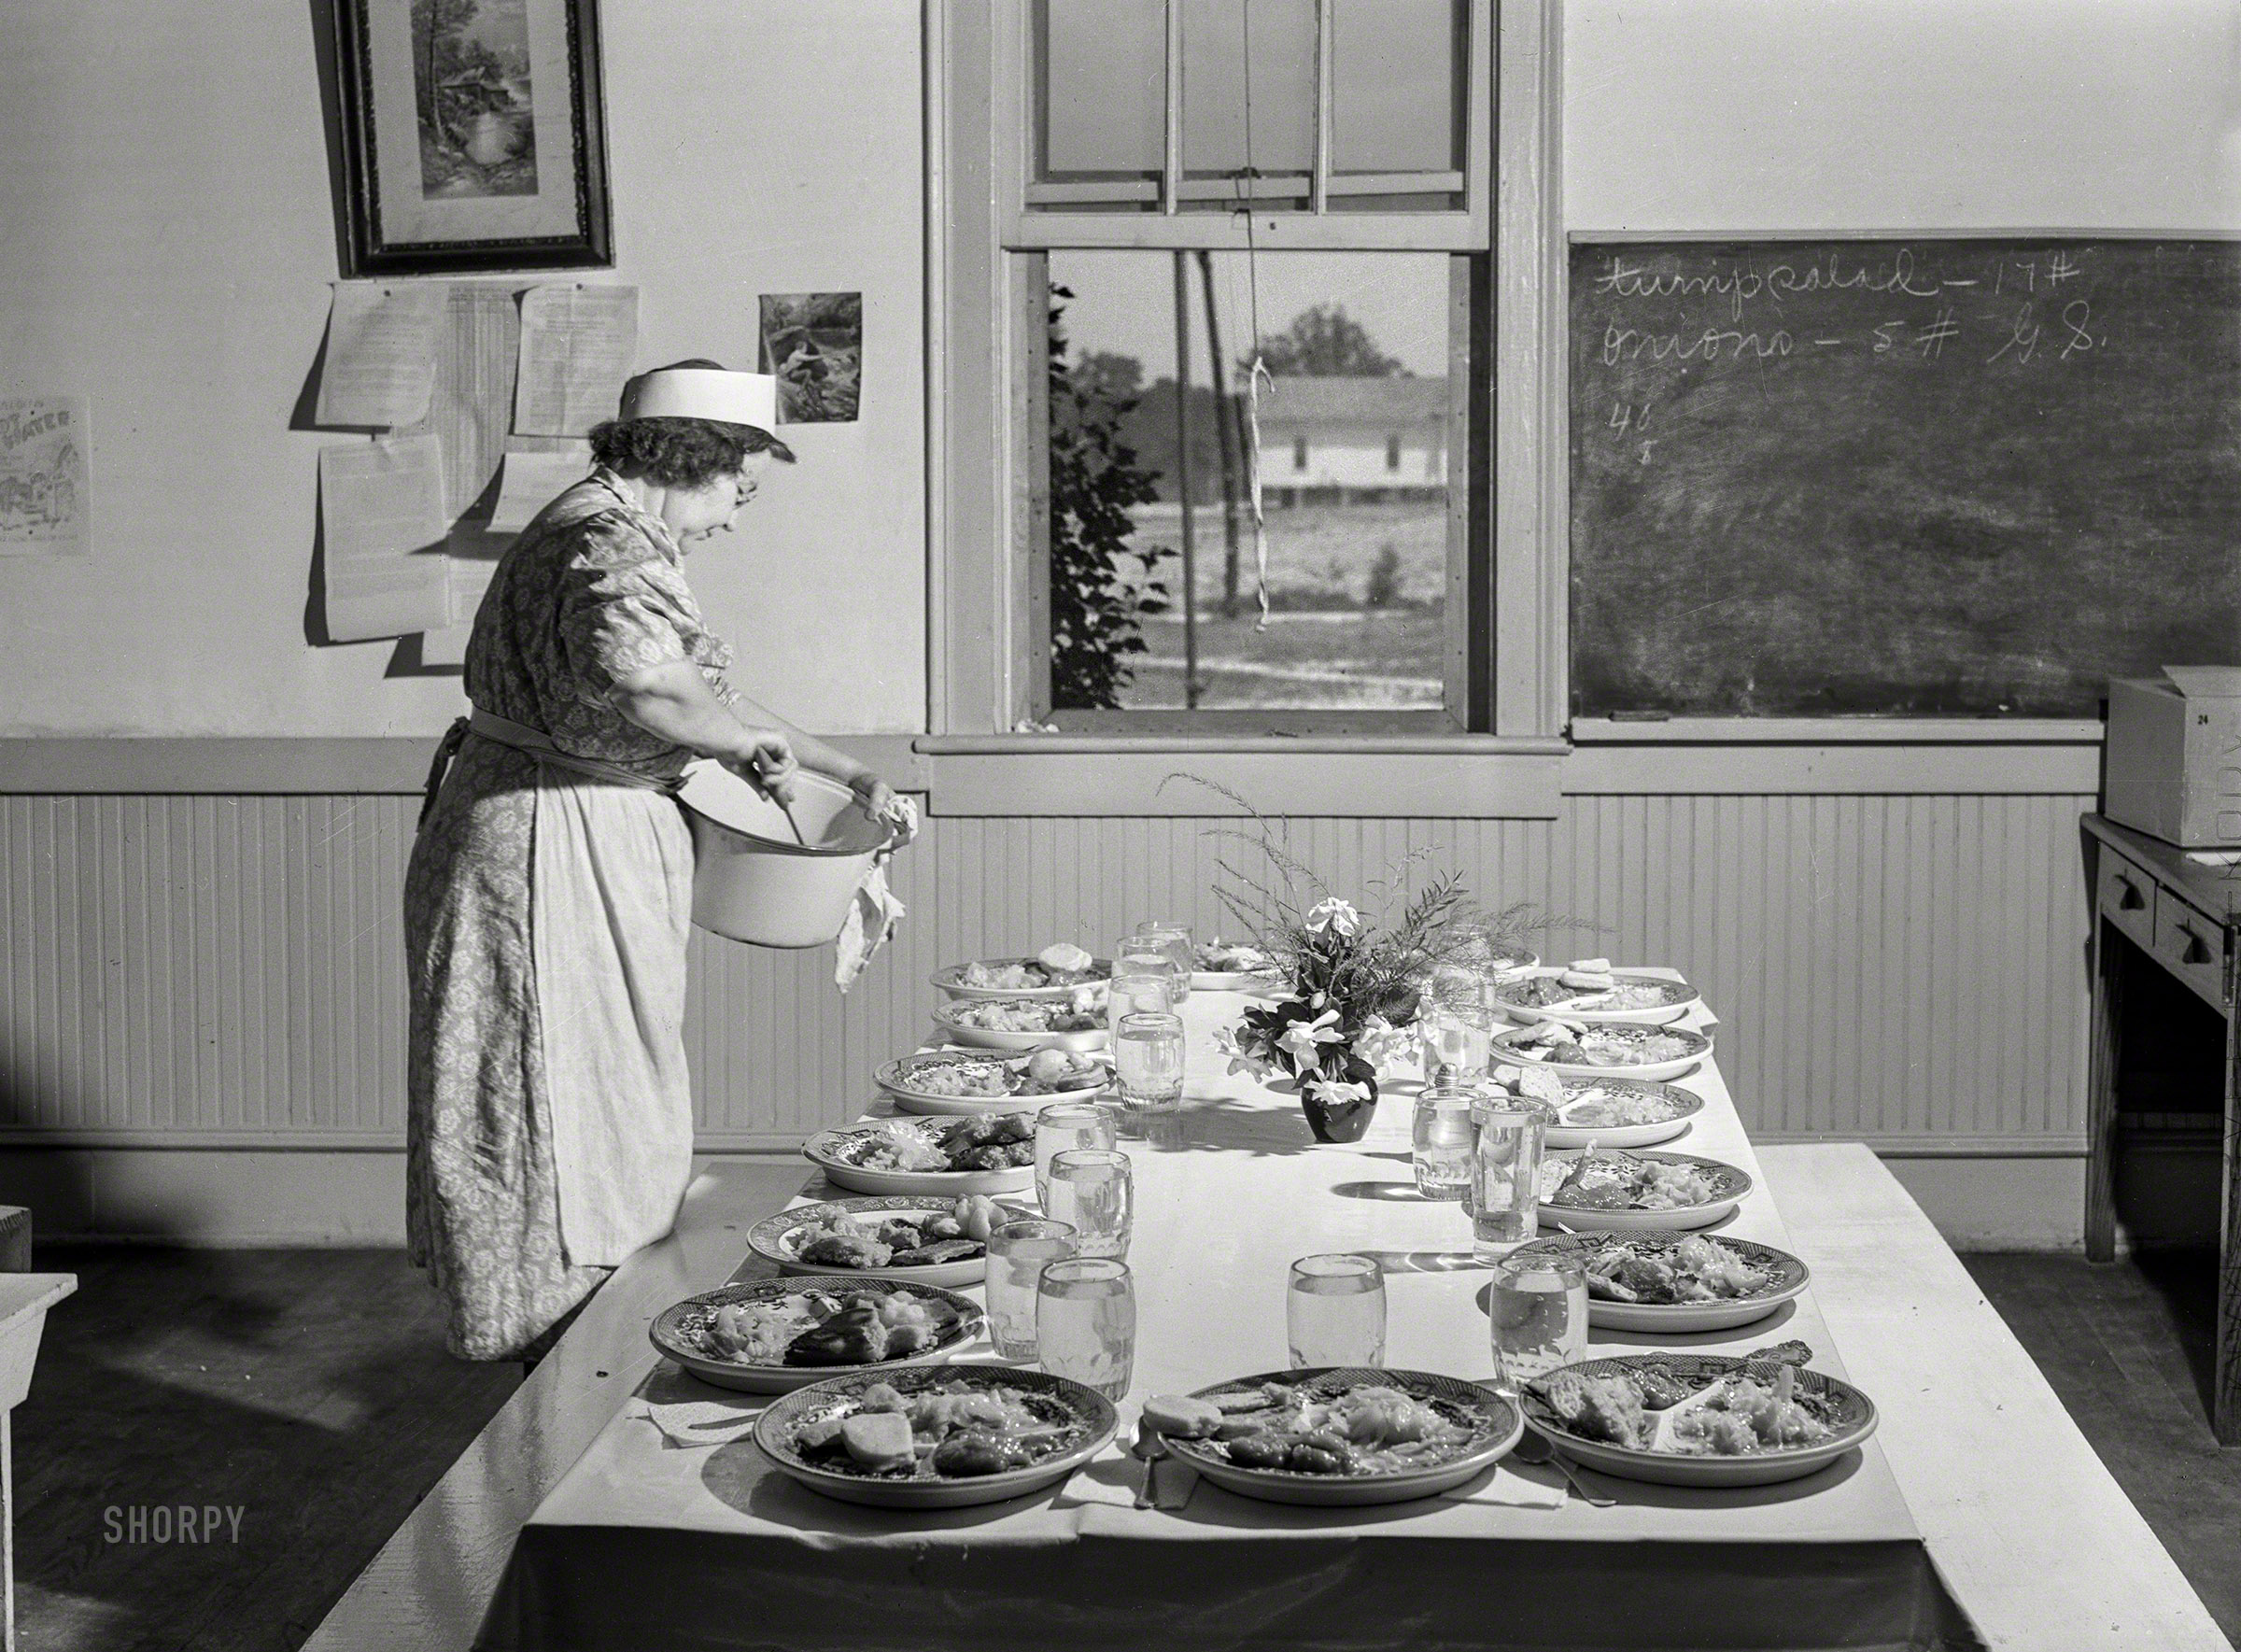 June 1941. "Five-cent hot lunches at the Woodville public school. Greene County, Georgia." Medium format negative by Jack Delano for the Farm Security Administration. View full size.